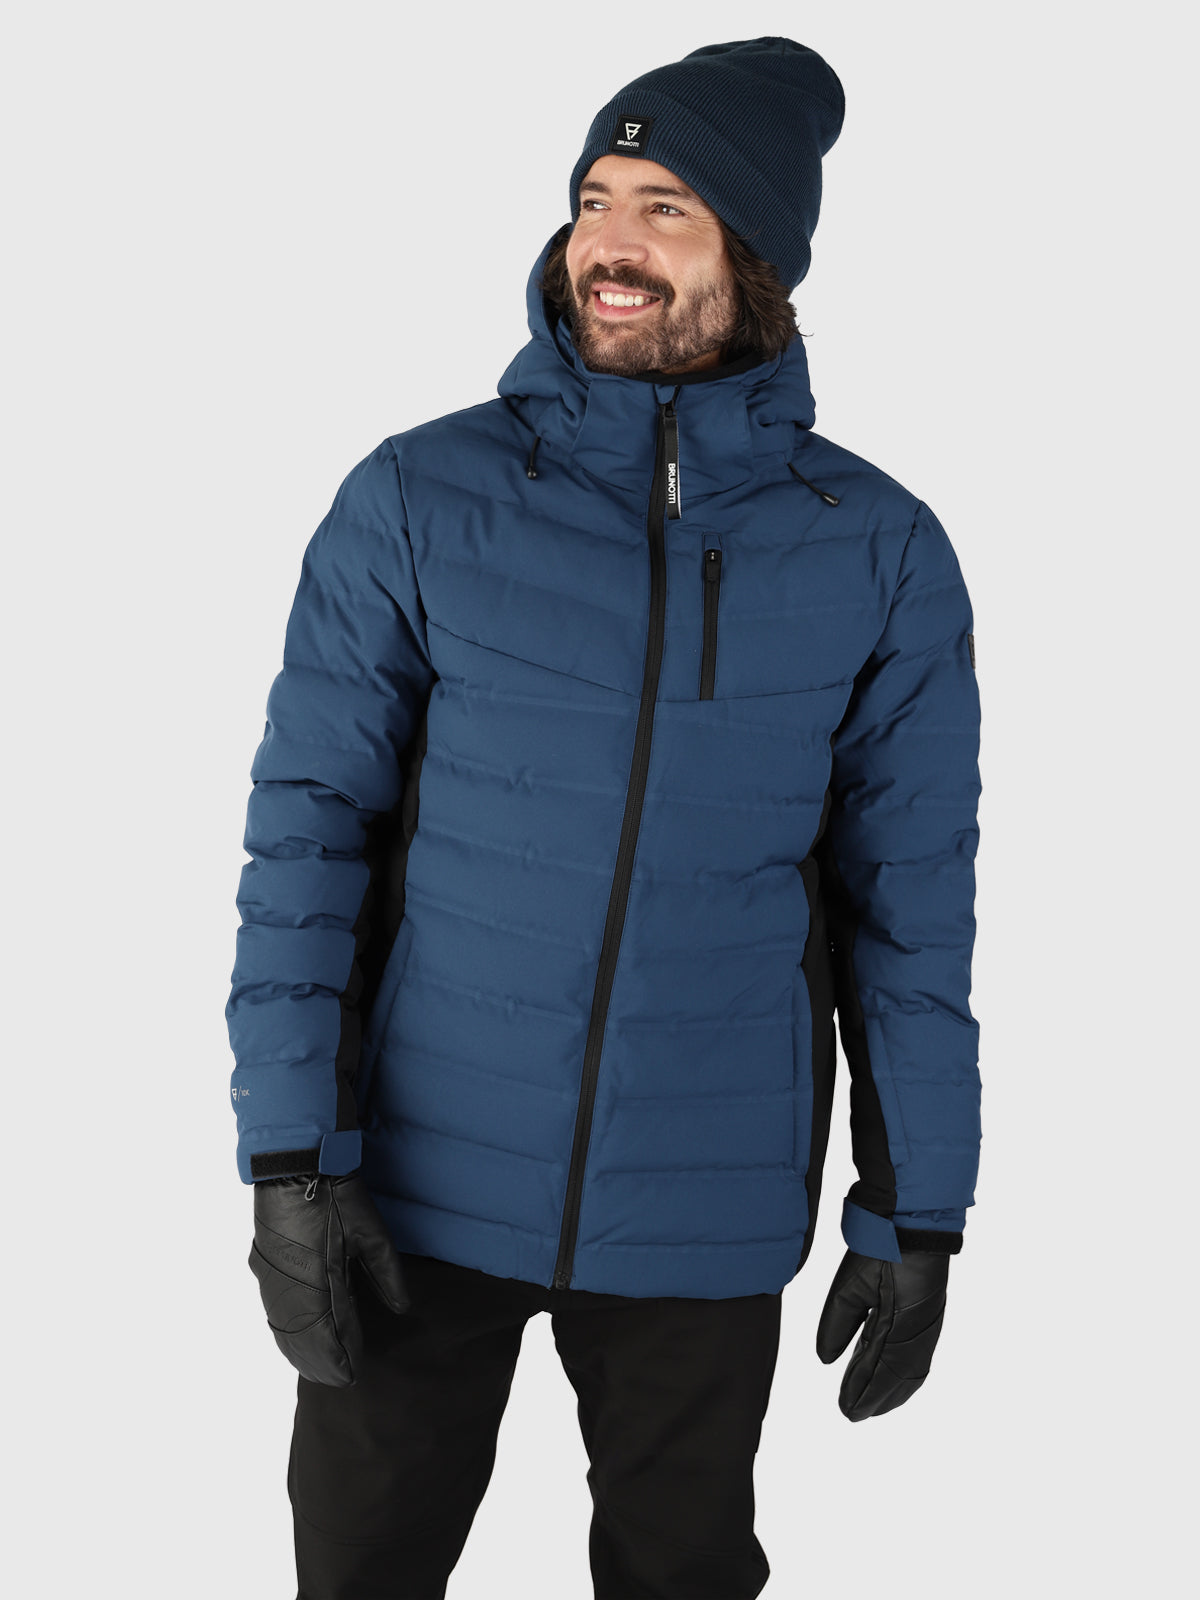 Winter Clothing Accessories & Sports